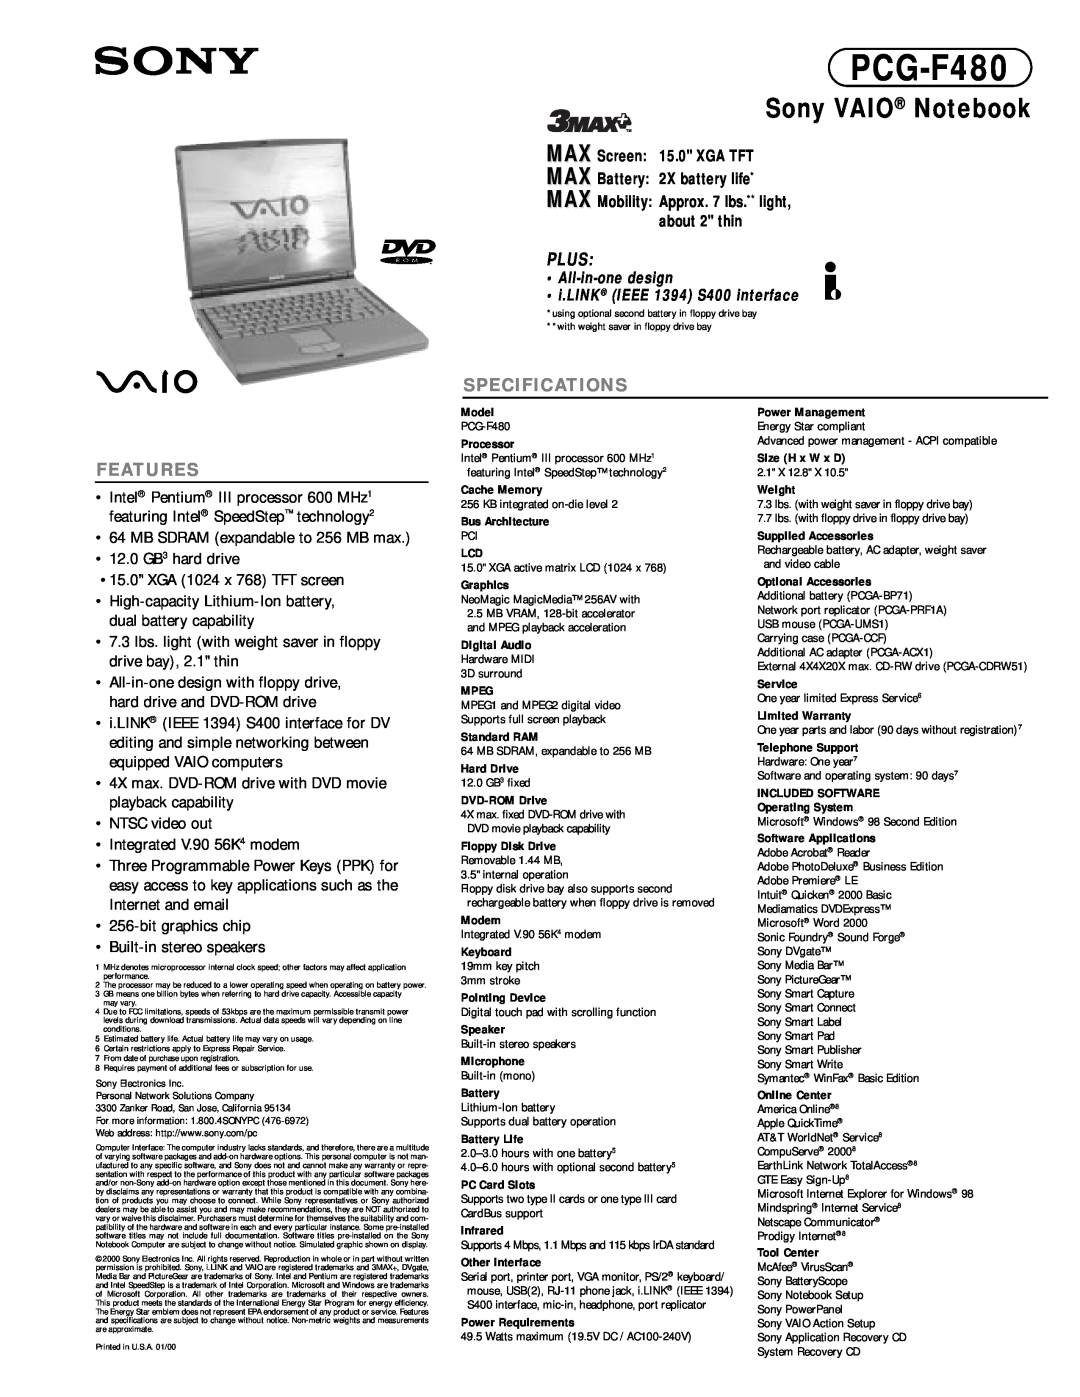 Sony PCG-F480 specifications Sony VAIO Notebook, Features, Plus, Specifications, XGA 1024 x 768 TFT screen 